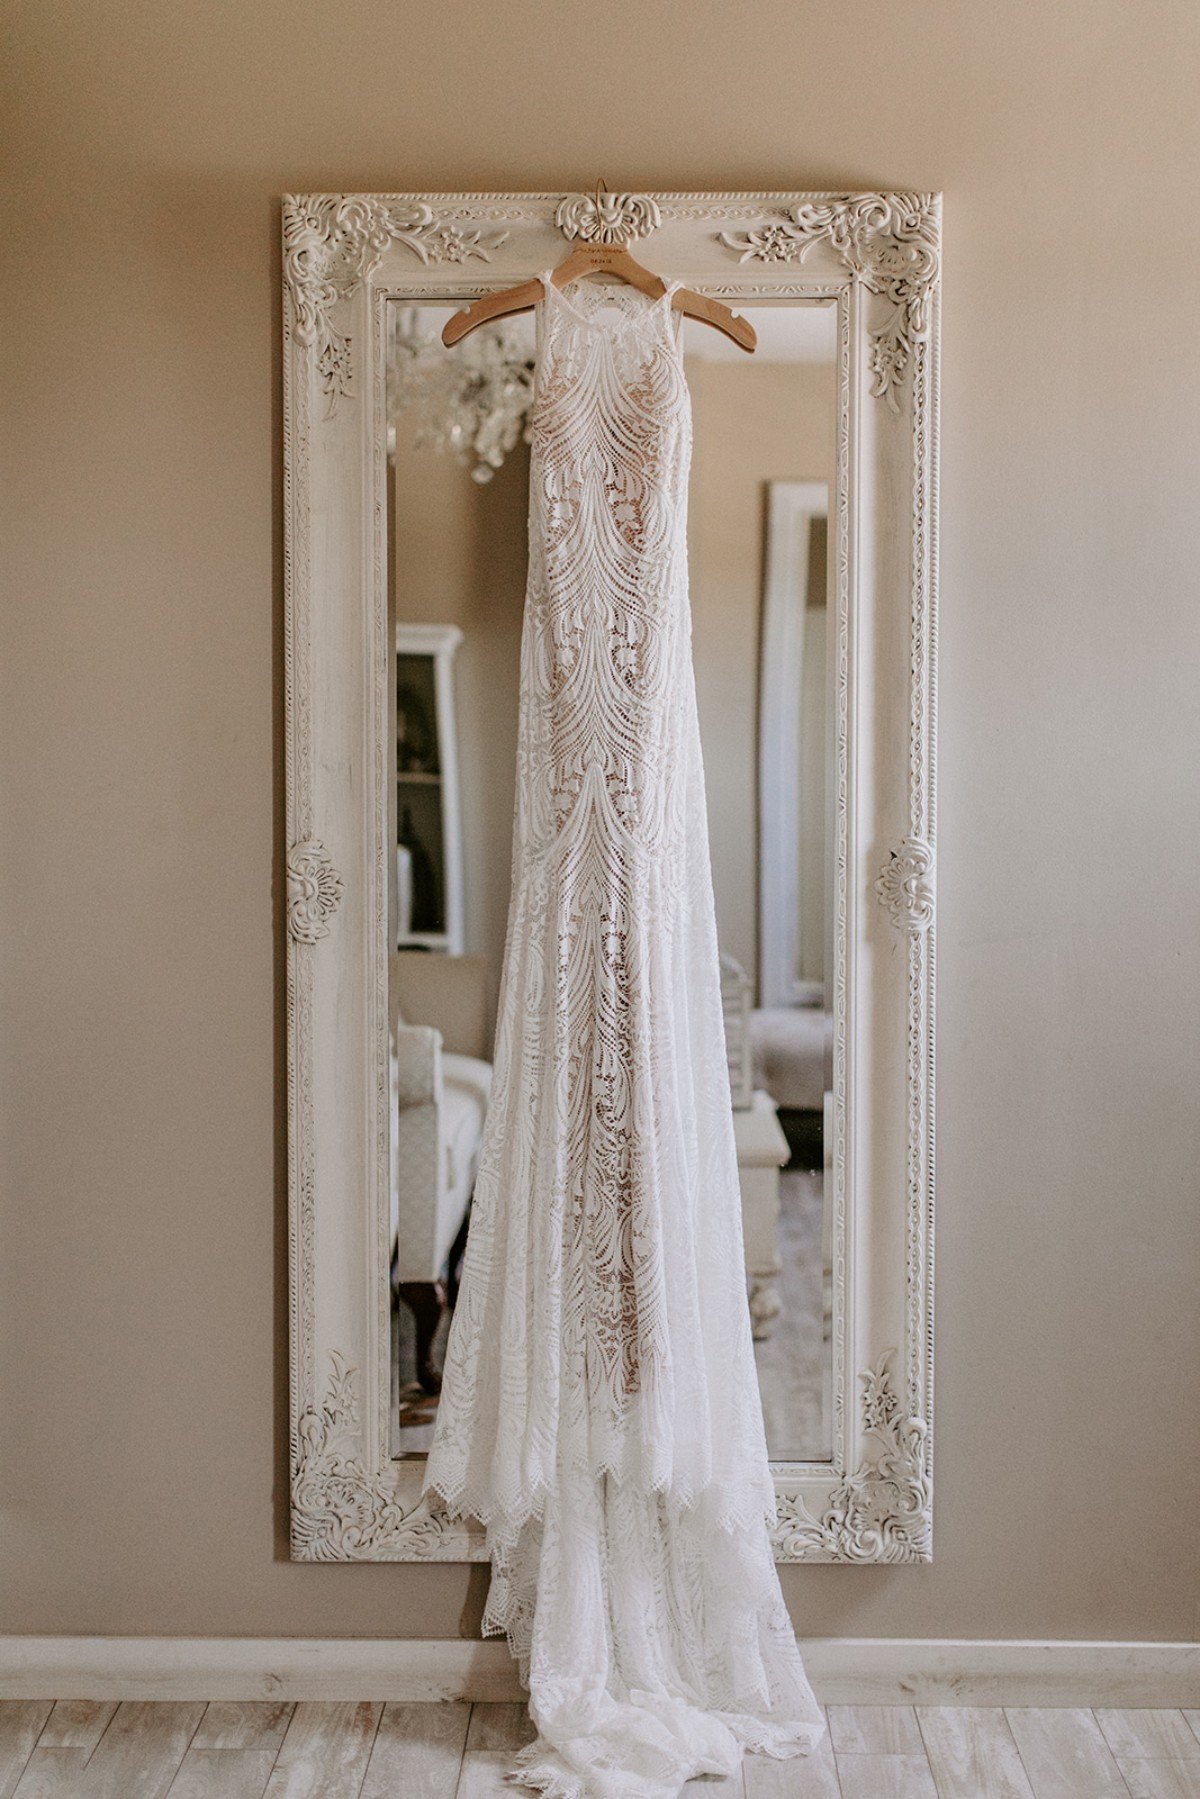 High neck wedding dress from Lover's Society from Lovely Bride